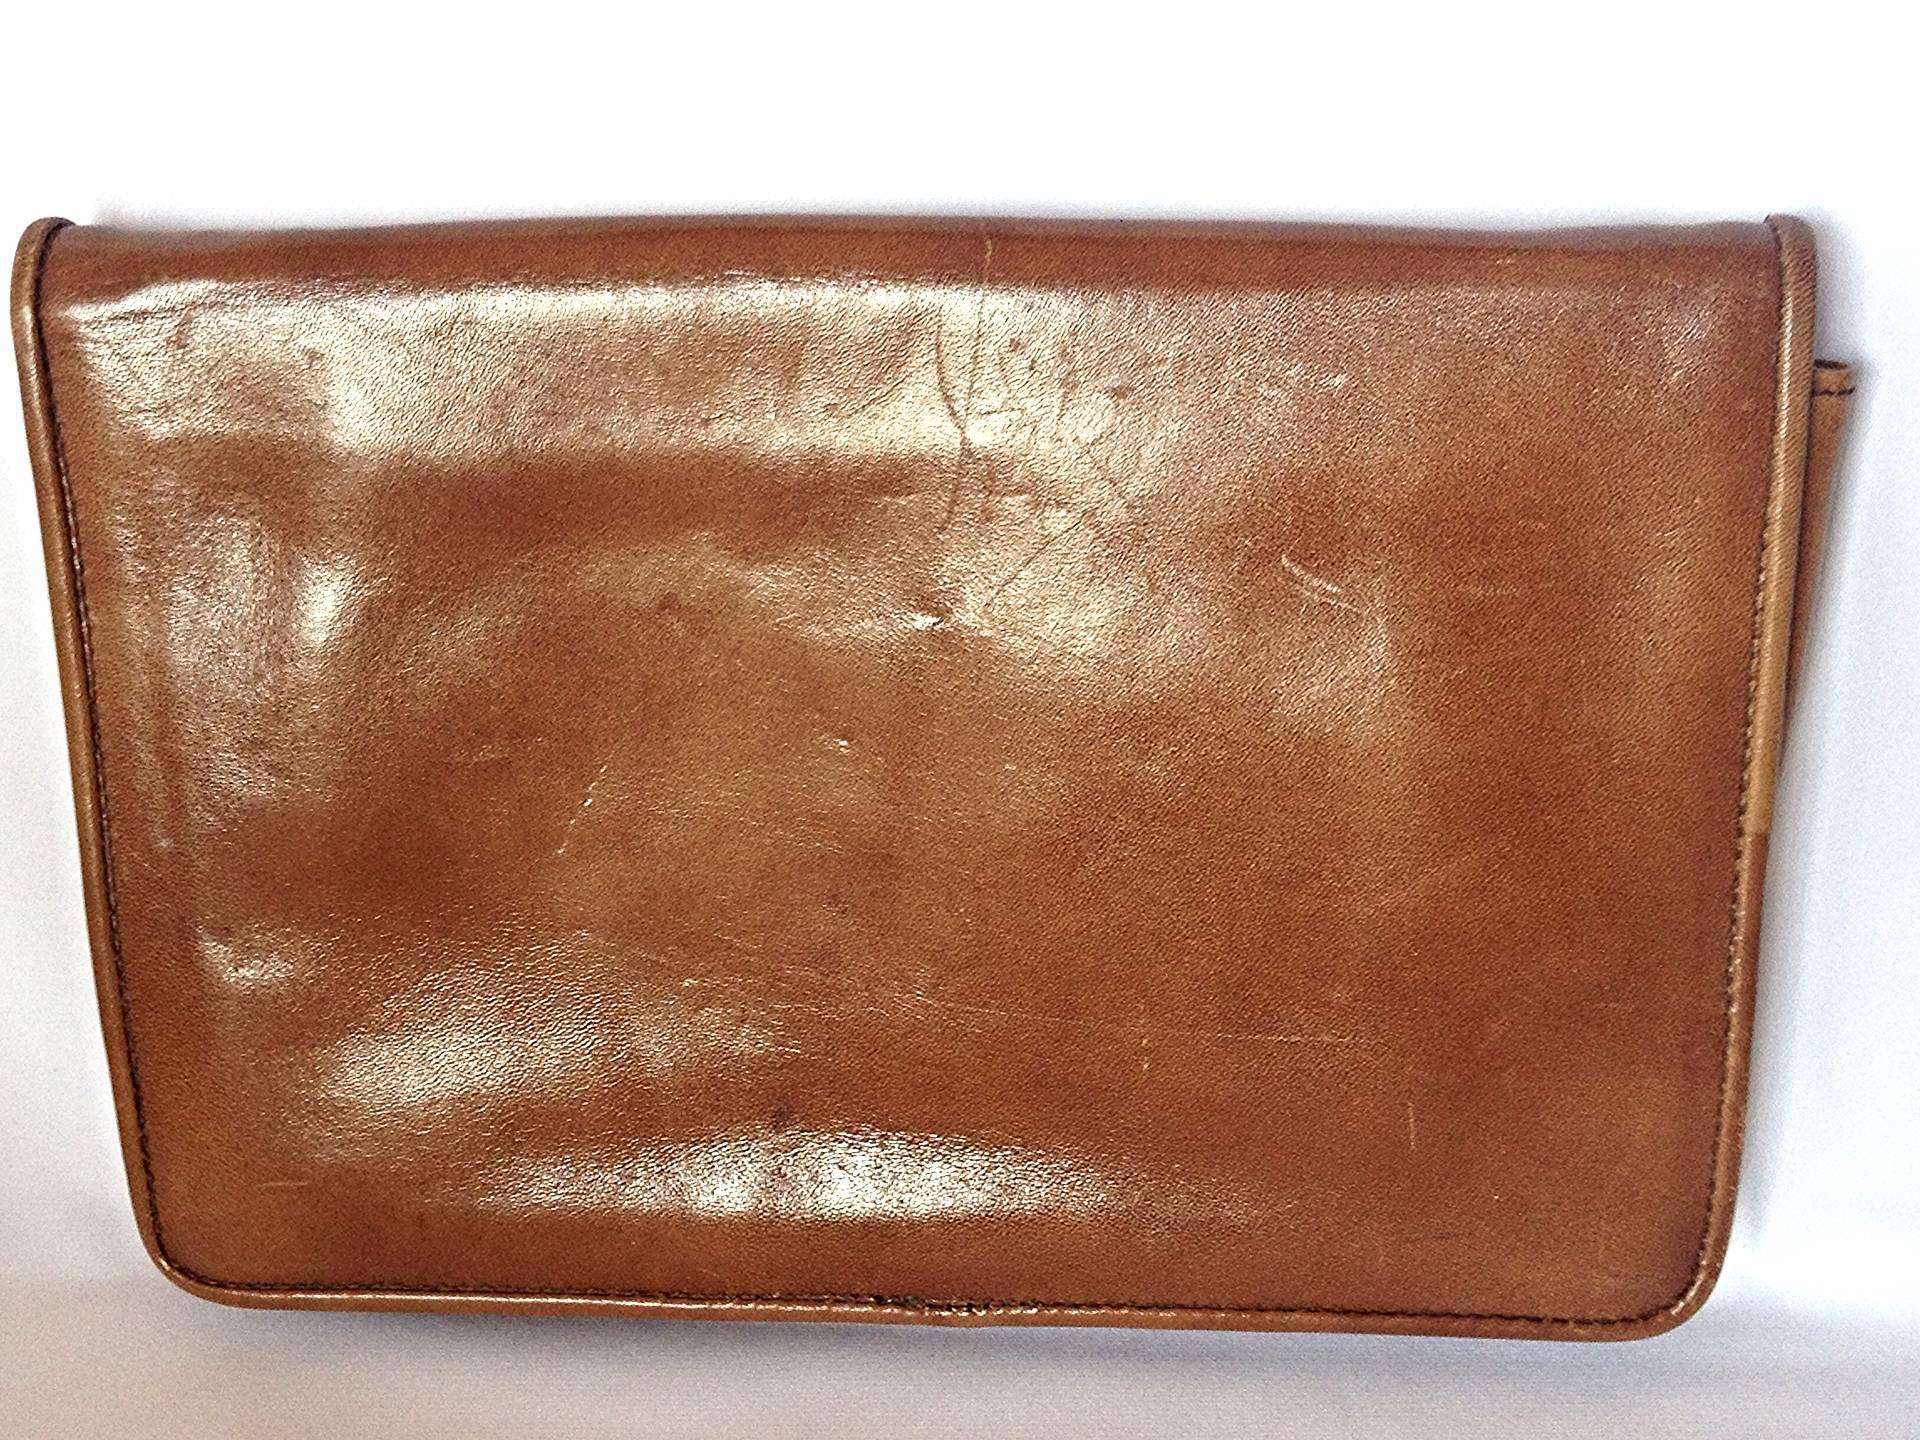 1980s vintage Yves Saint Laurent genuine brown leather mini document bag, clutch purse with embossed logo. Classic unisex style YSL purse.

This is a vintage classic design leather clutch bag from Yves Saint Laurent in approximately from the 80s. 